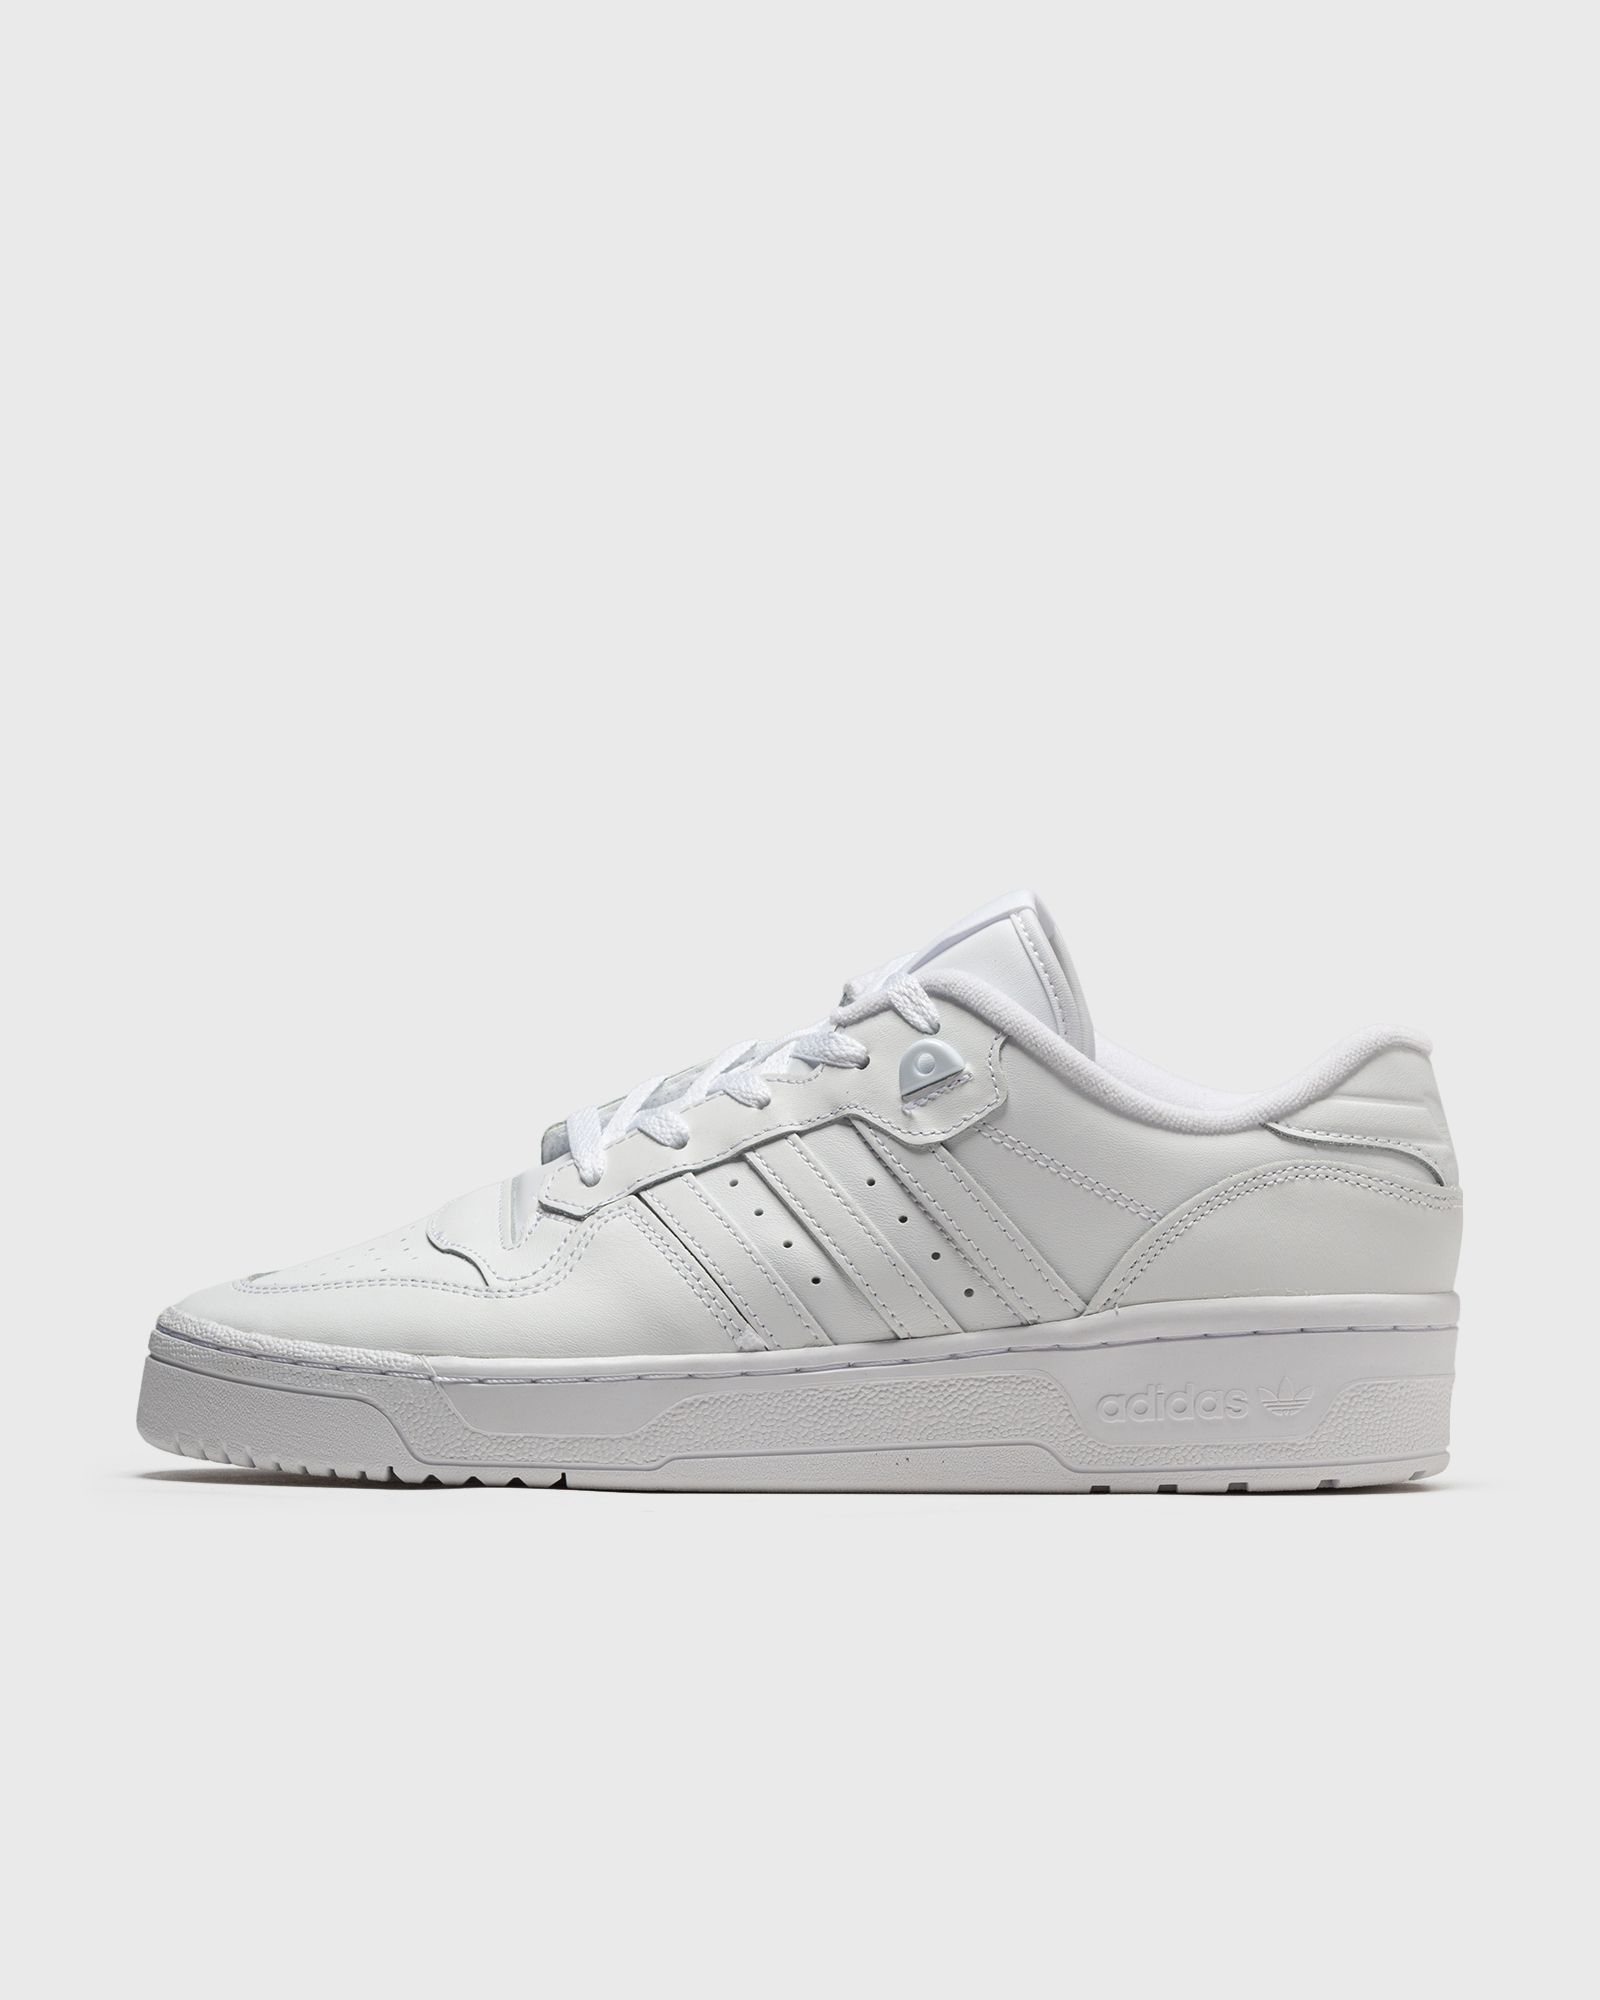 Adidas - rivalry low men basketball|lowtop white in größe:43 1/3